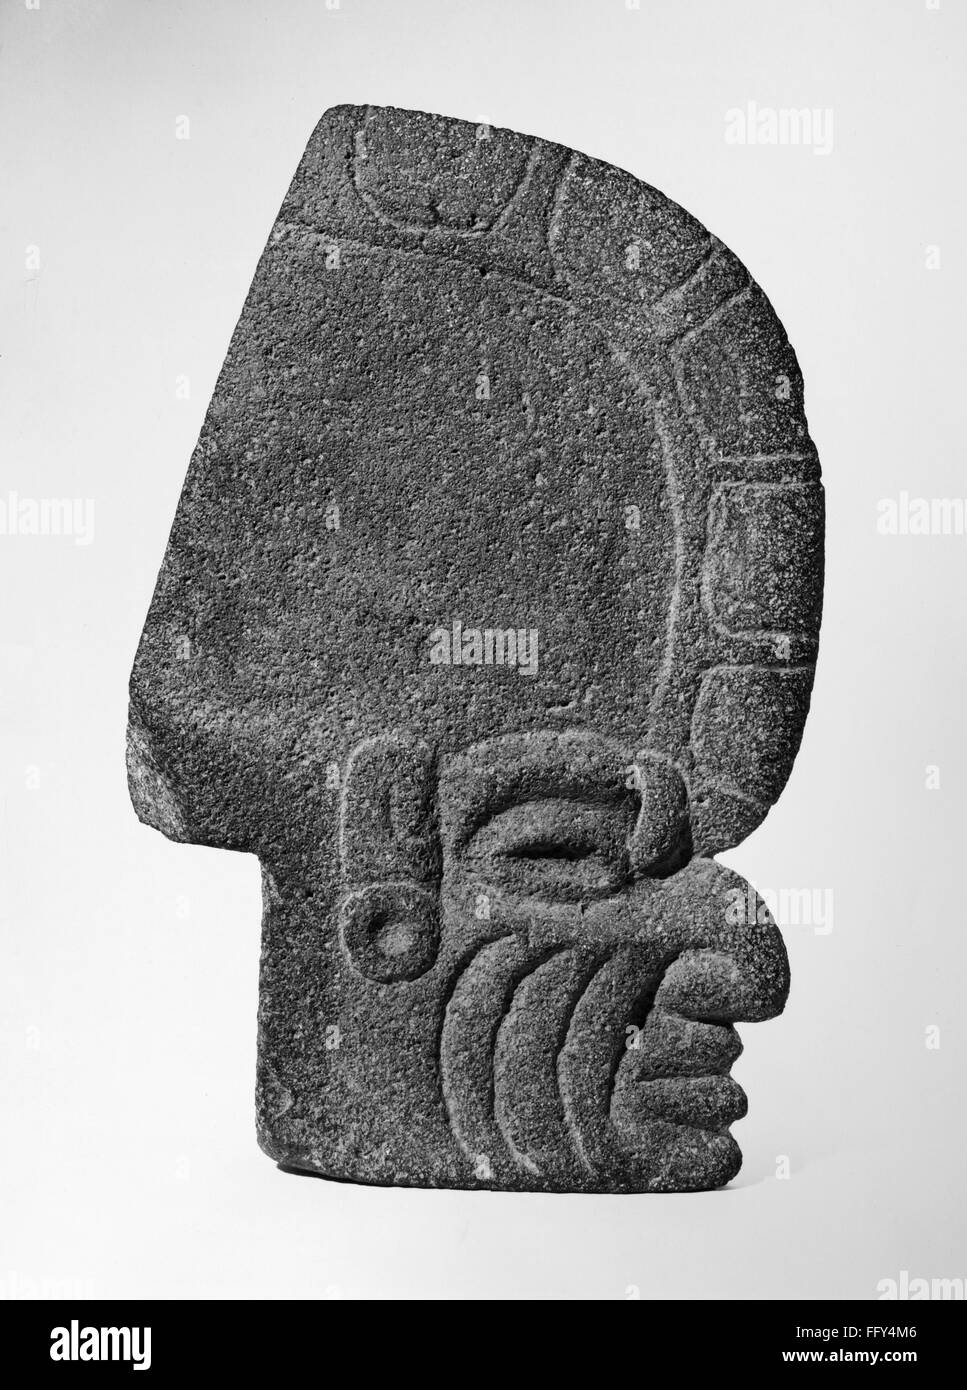 MEXICO: TOTONAC HEAD. /nThin stone head in the style of the Totonac culture. From Tlaxcala, Mexico. Stock Photo